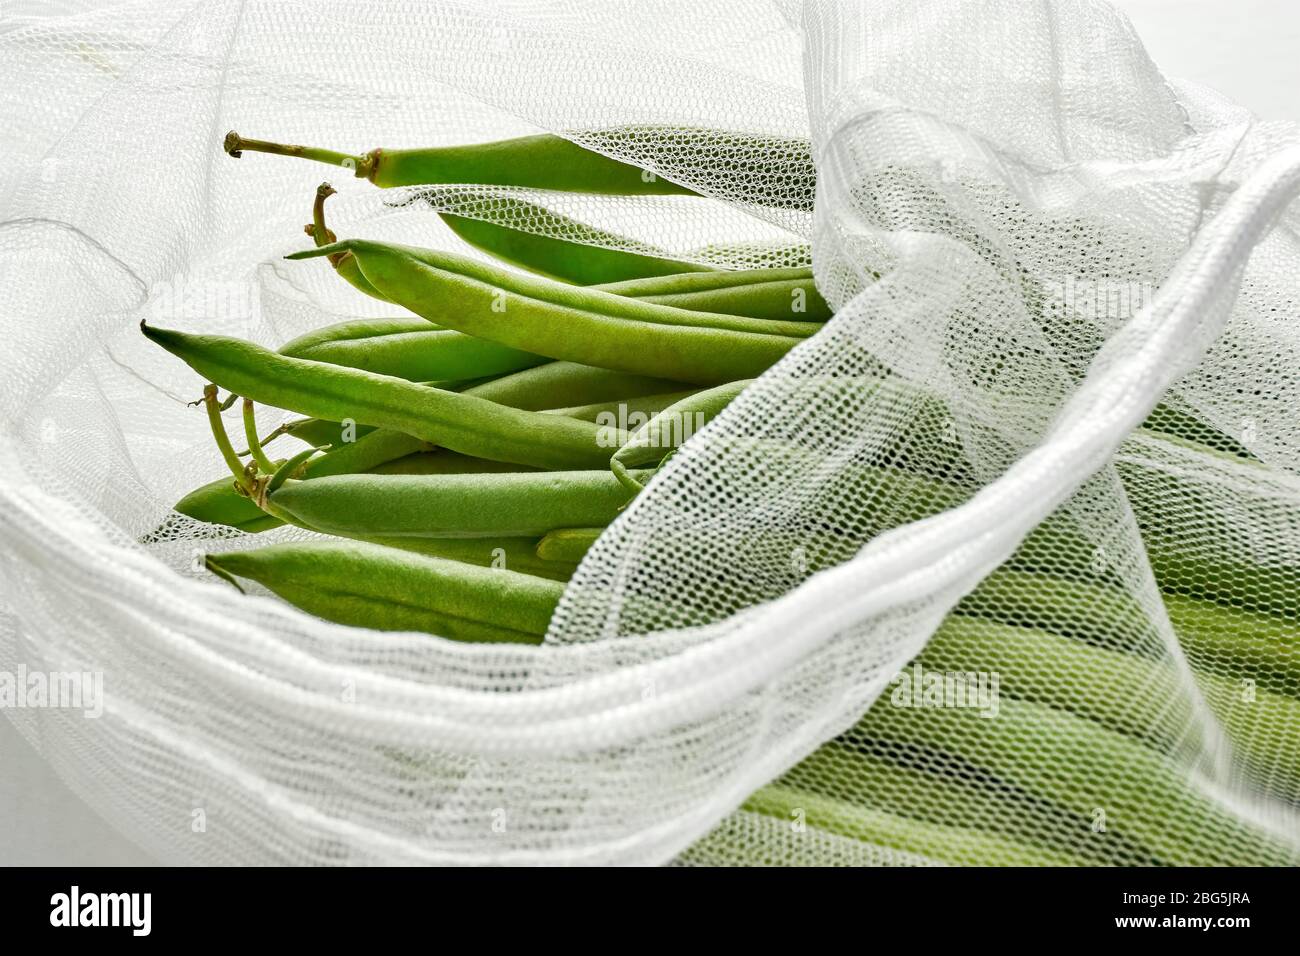 Green beans in sustainable grocery mesh bag. Vegetables in reusable eco ...